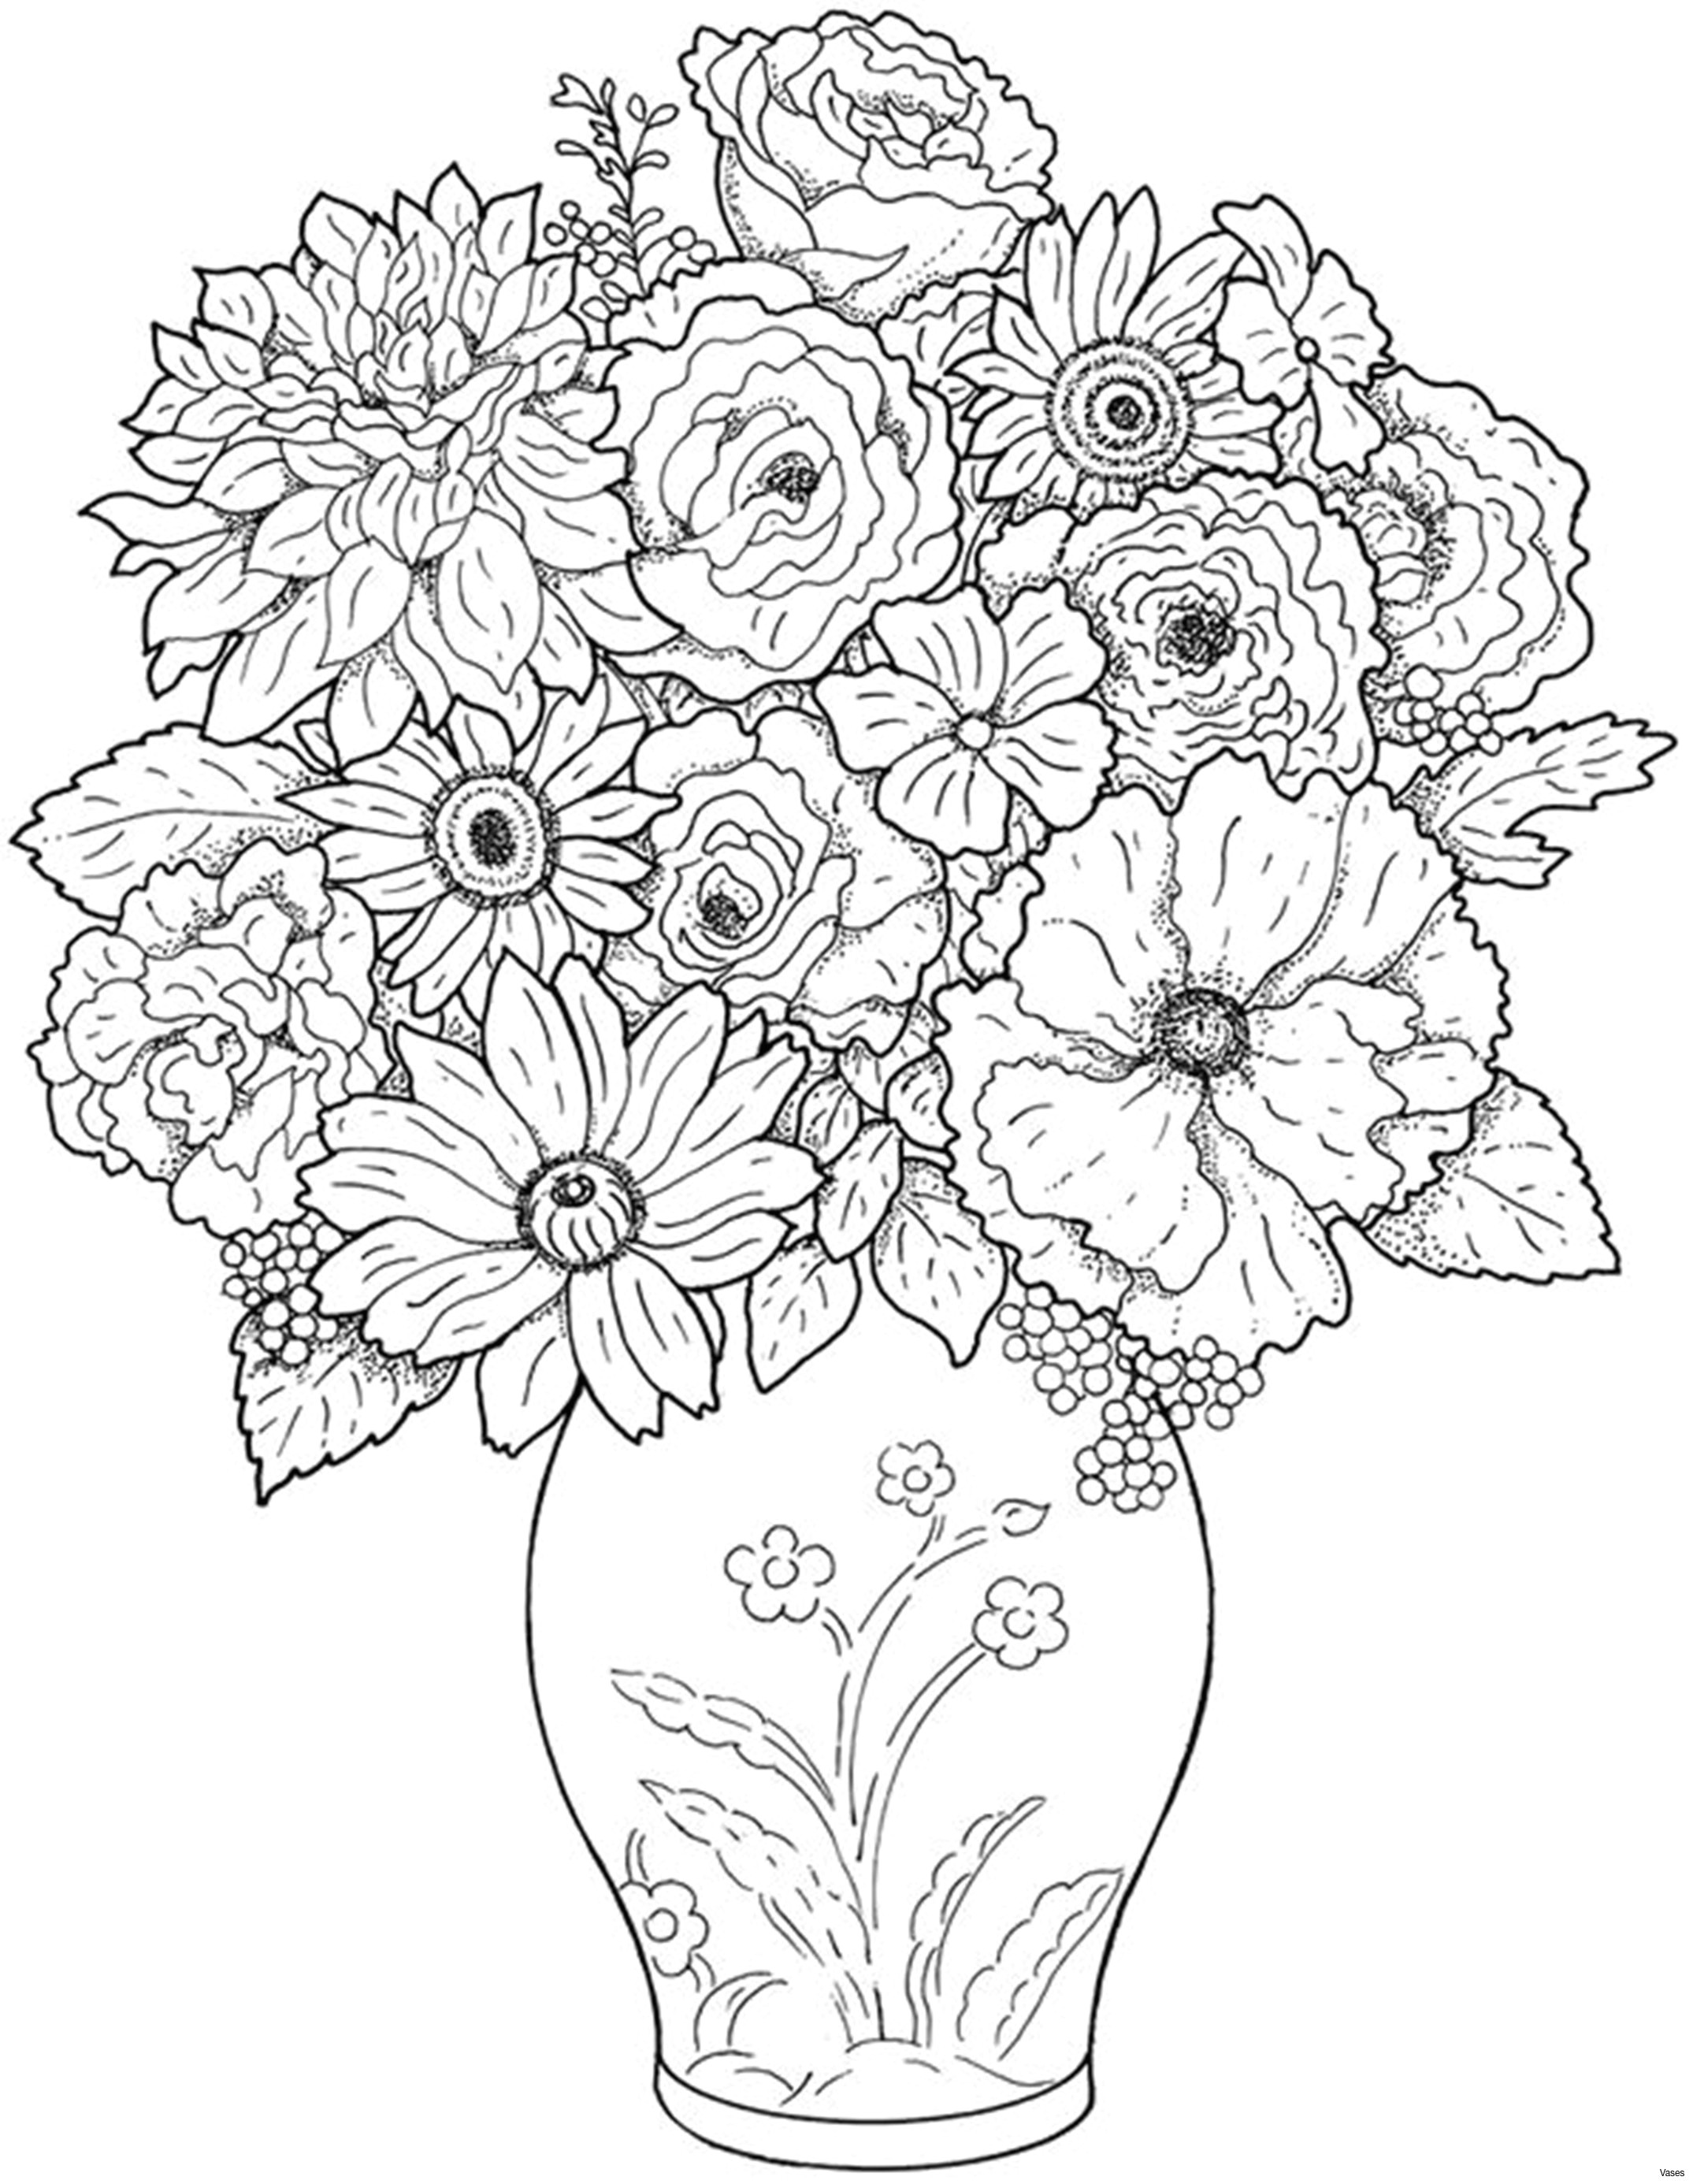 Drawing Flowers Pic Www Colouring Pages Aua Ergewohnliche Cool Vases Flower Vase Coloring